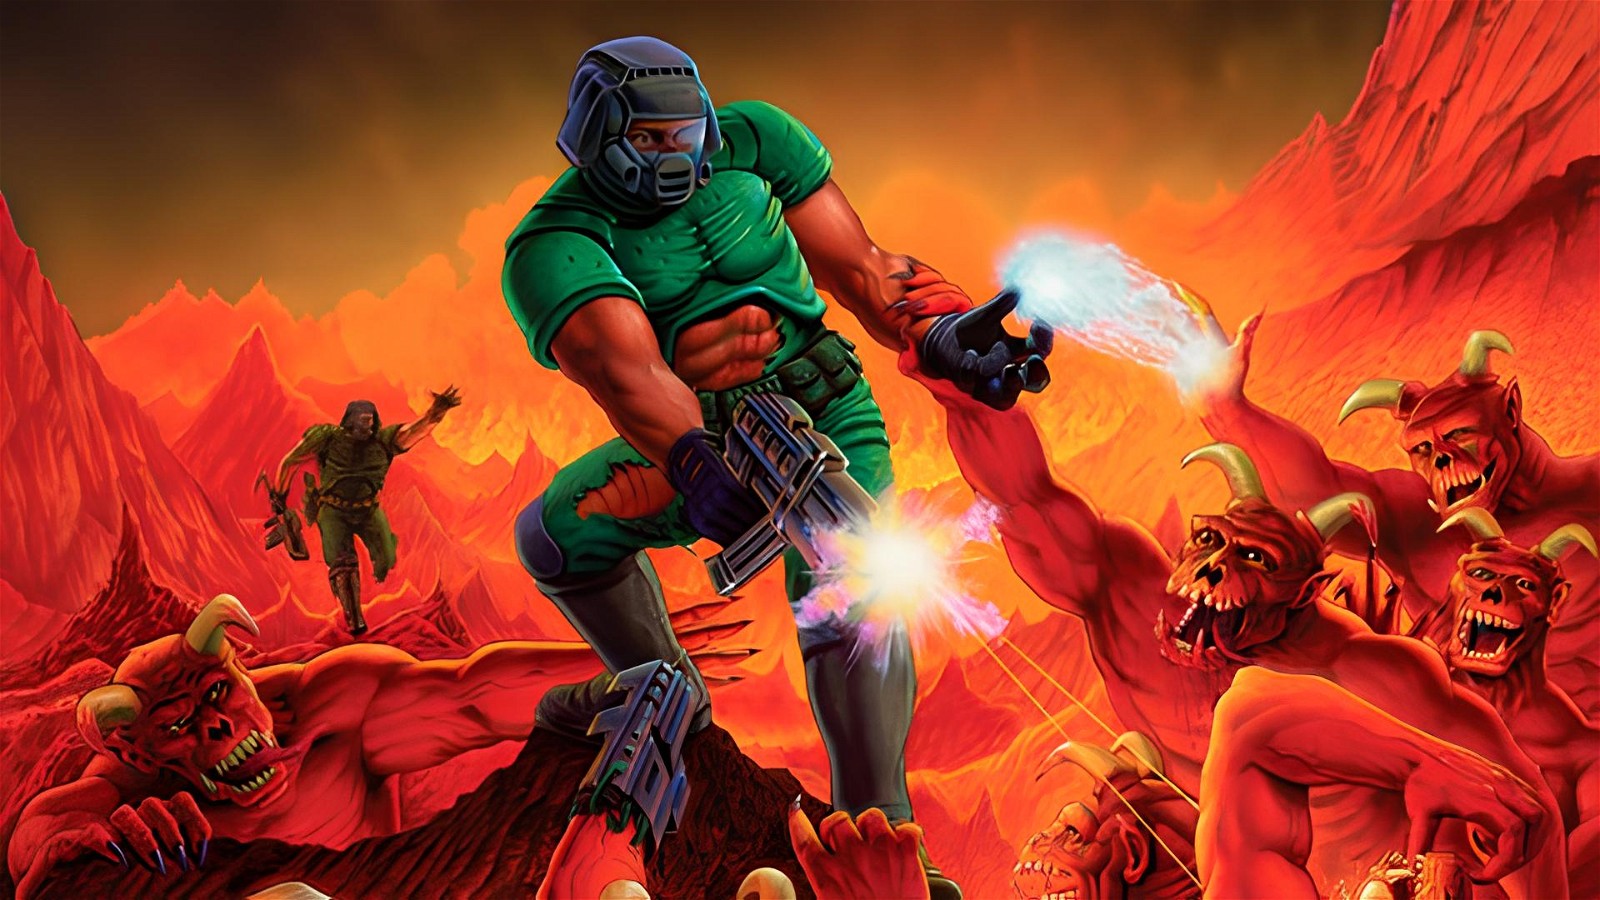 The first ever Doom game responsible for elements used today | Released in 1993